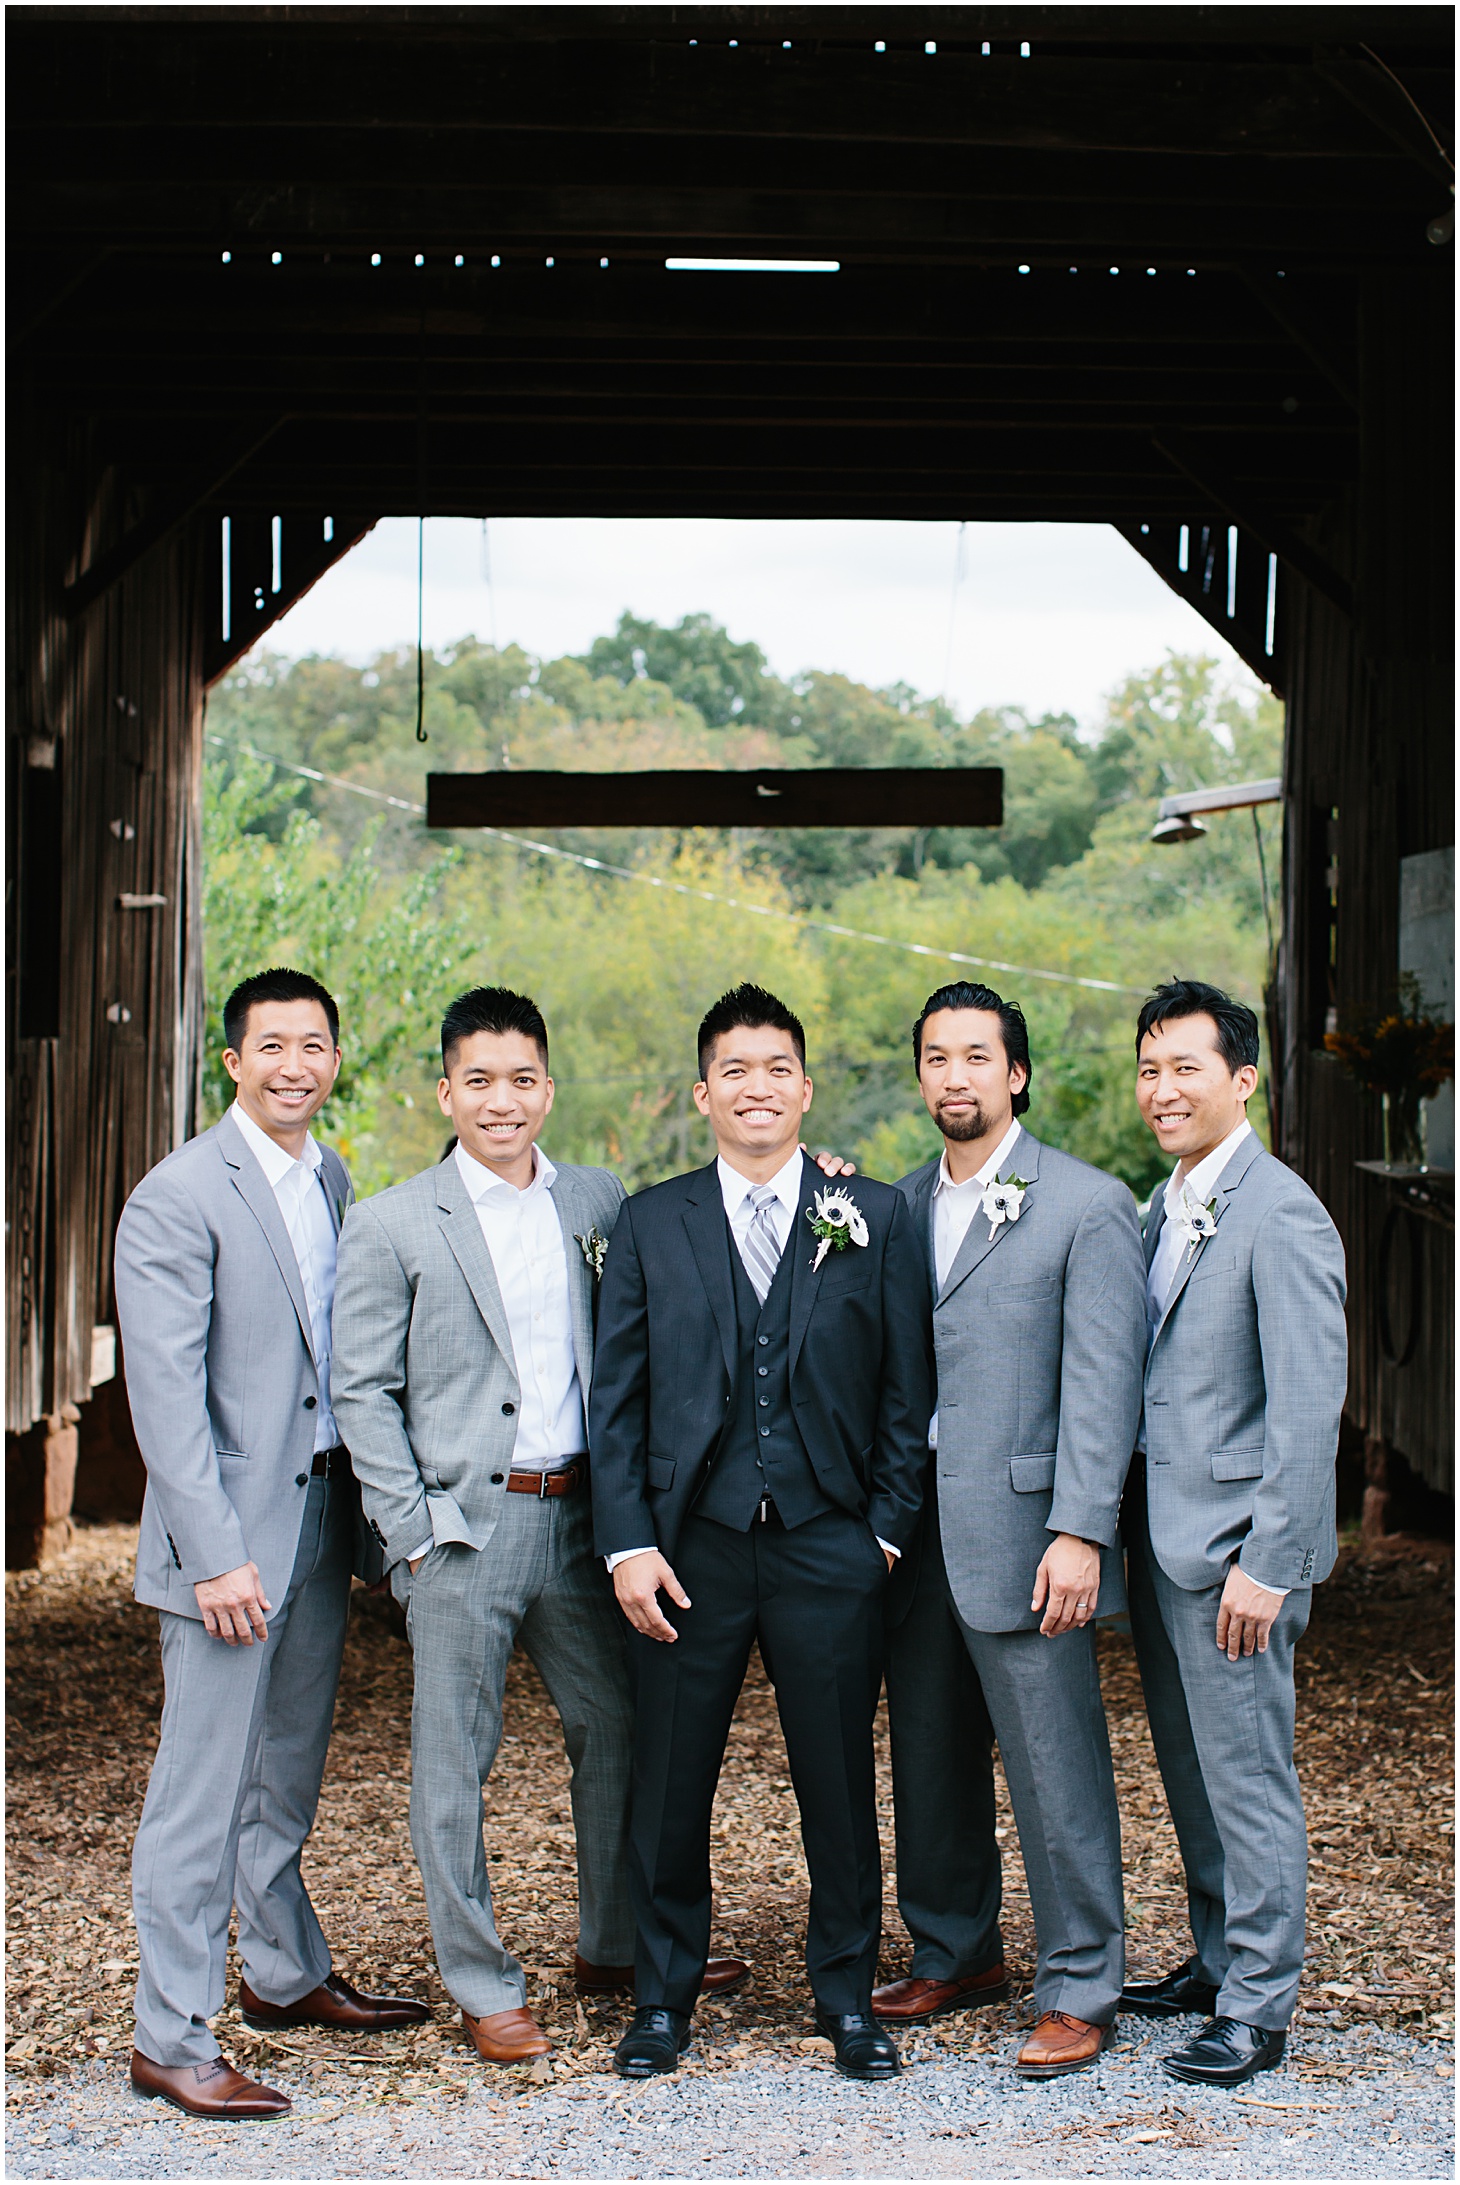 Rustic Floral Wedding at Rocklands Farm & Winery by Sarah Bradshaw Photography_0015